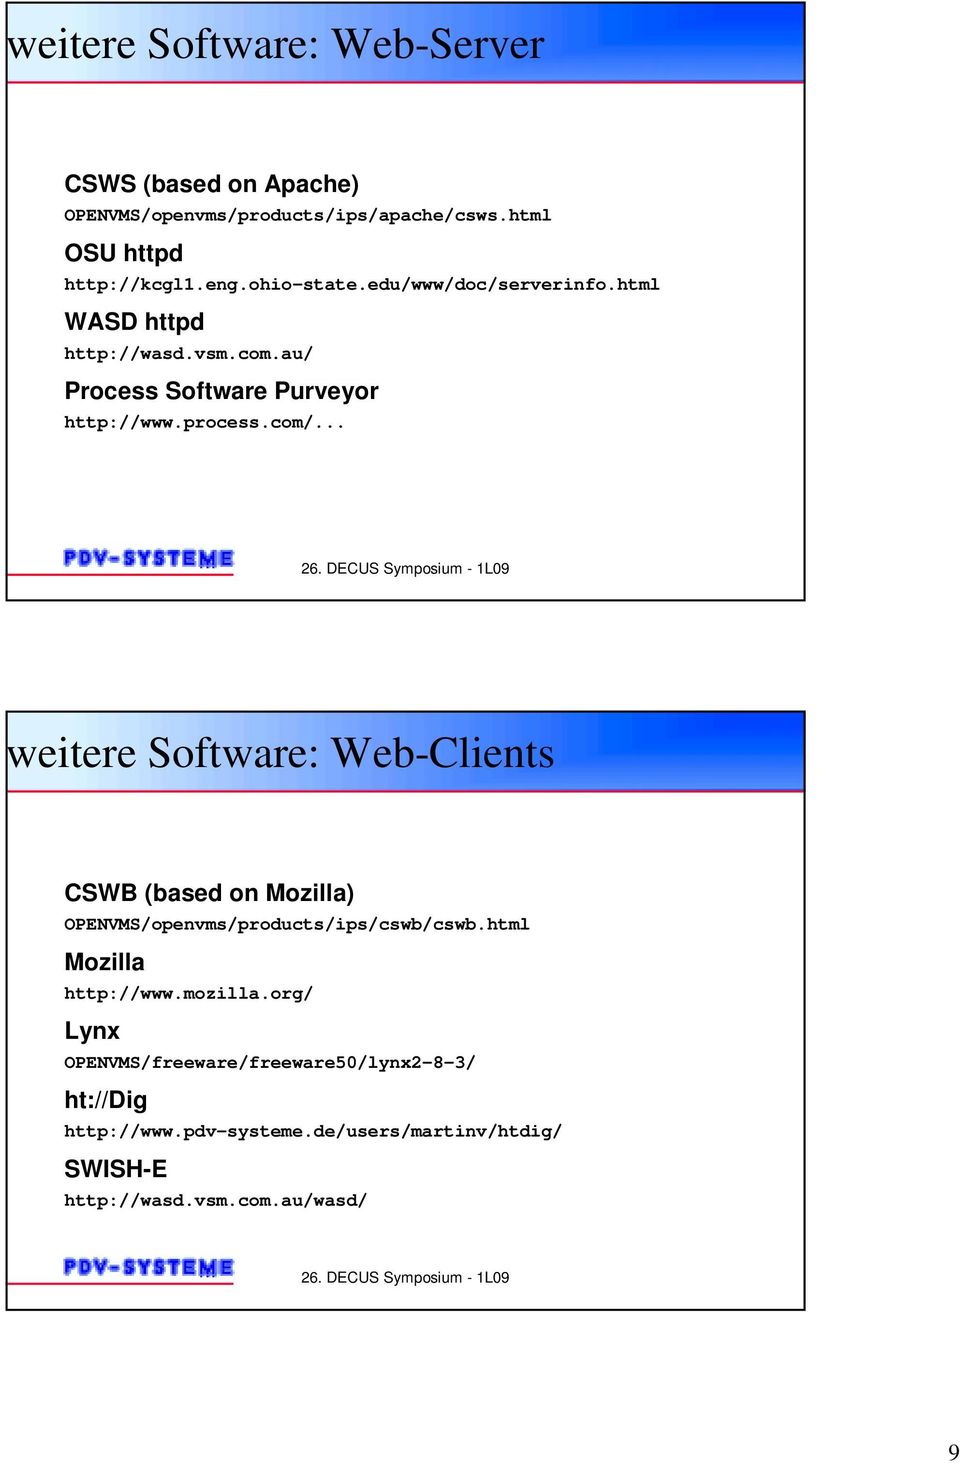 .. weitere Software: Web-Clients CSWB (based on Mozilla) OPENVMS/openvms/products/ips/cswb/cswb.html Mozilla http://www.mozilla.